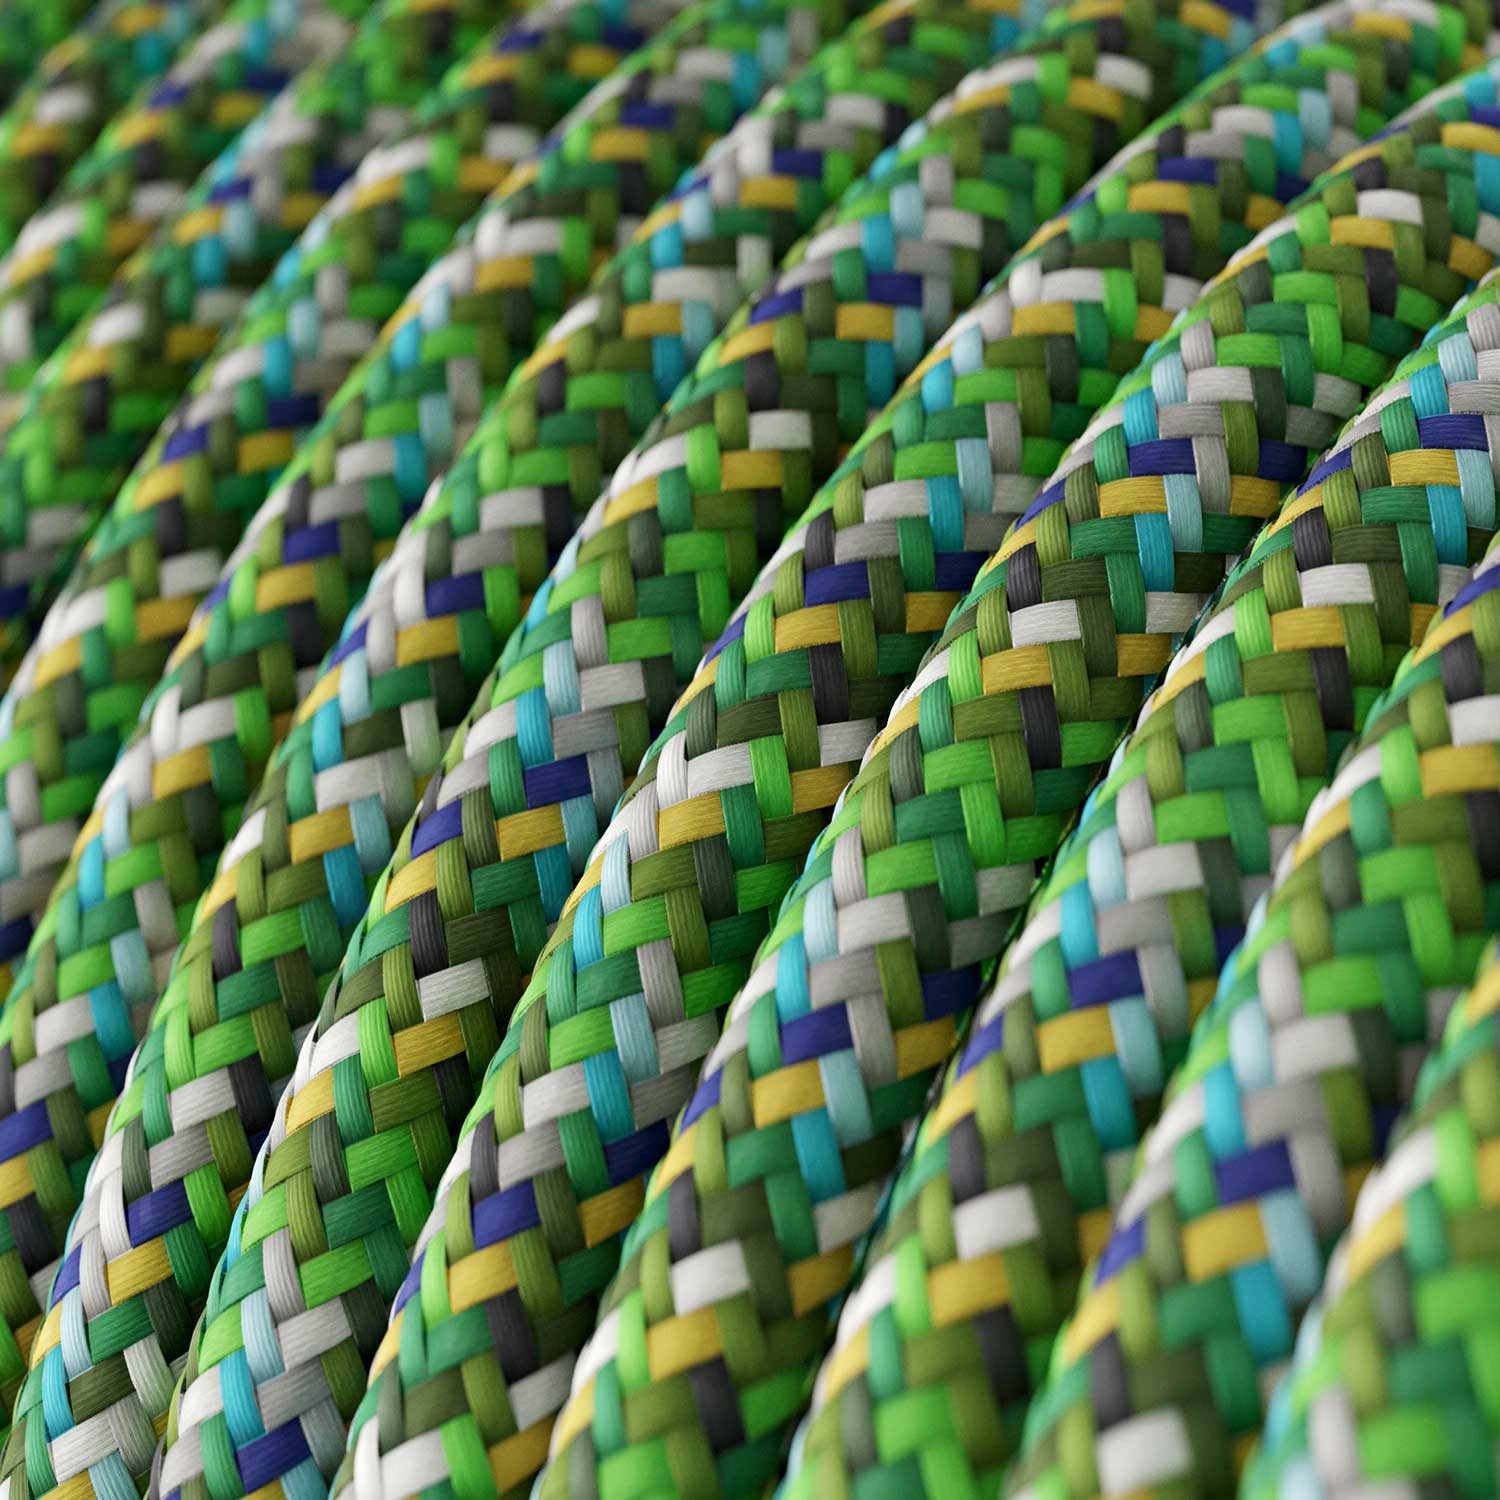 Round Electric Cable covered by rayon fabric RX05 Pixel Green